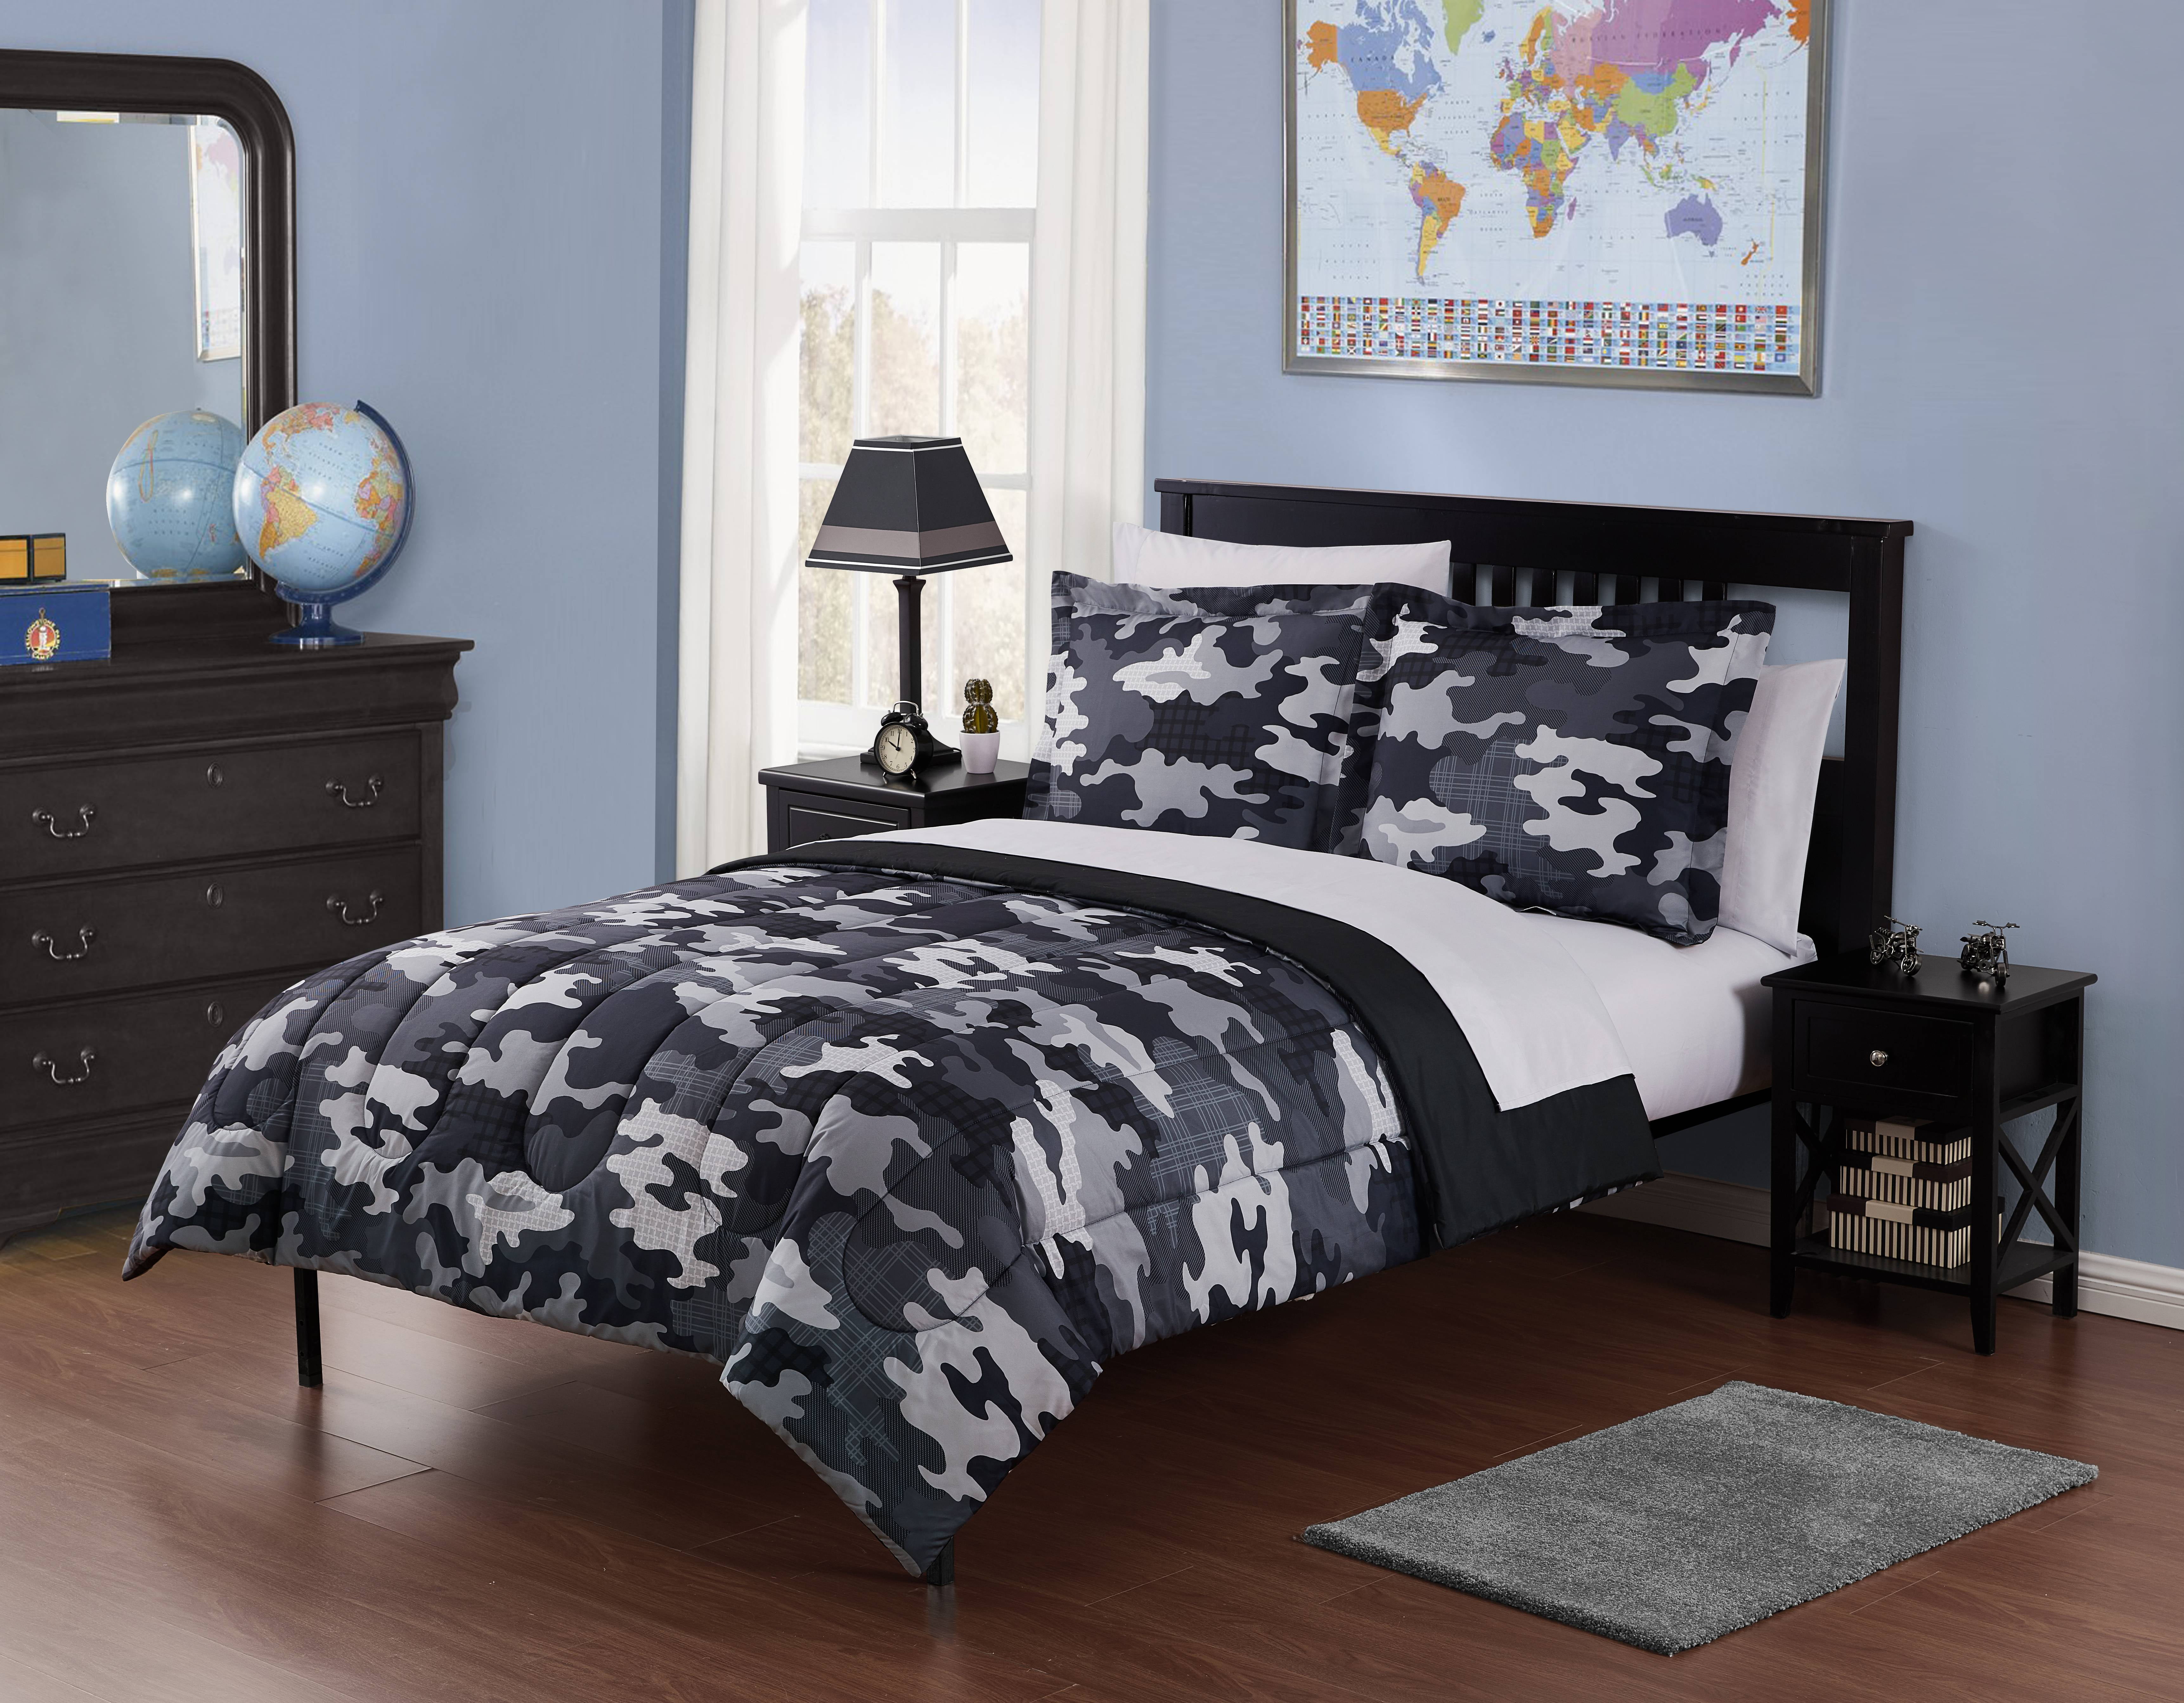 COMFORTER QUEEN SHEETS WITH CURTAINS 12 pc BLACK CAMO QUEEN SIZE SET! 